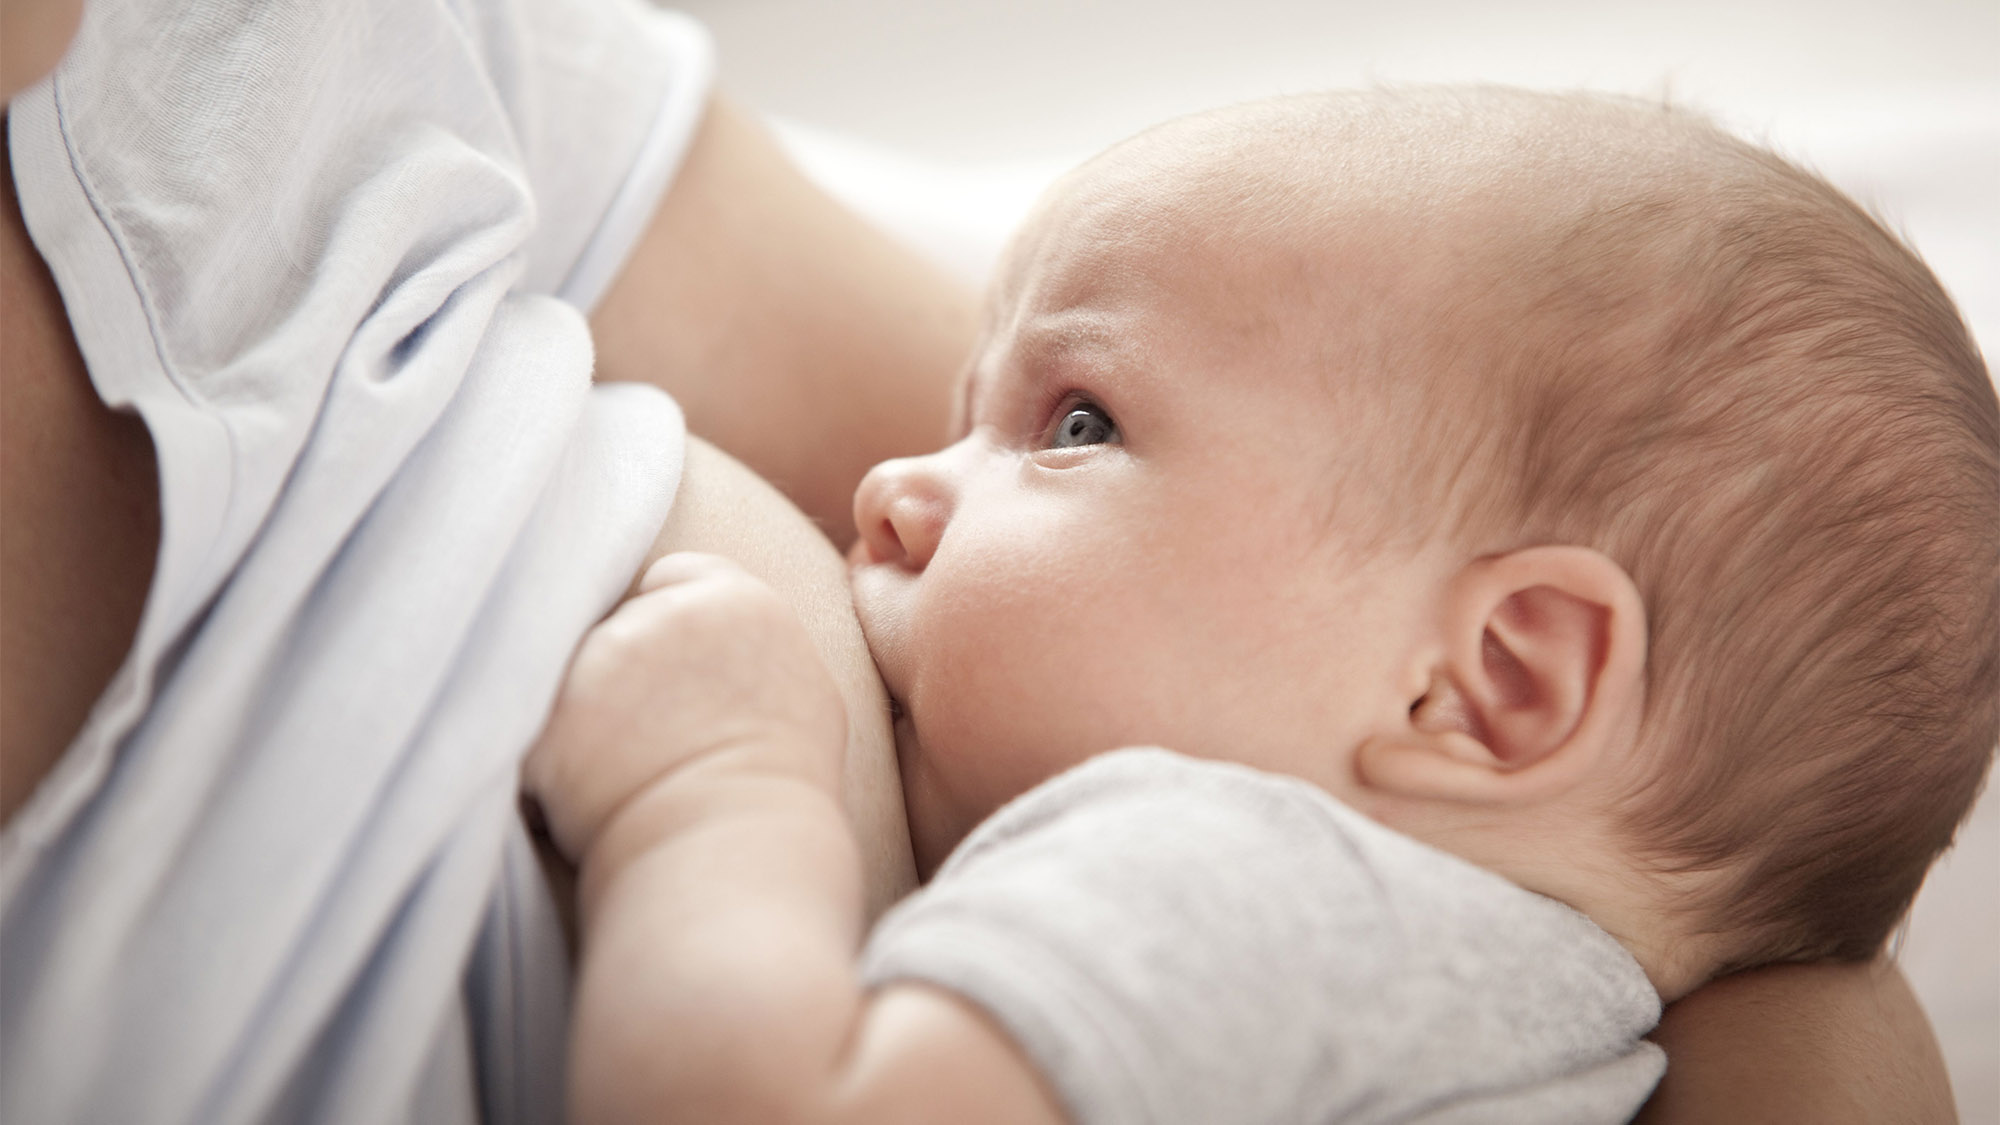 Breastfeeding and Sex: How Nursing Impacts Your Libido and What